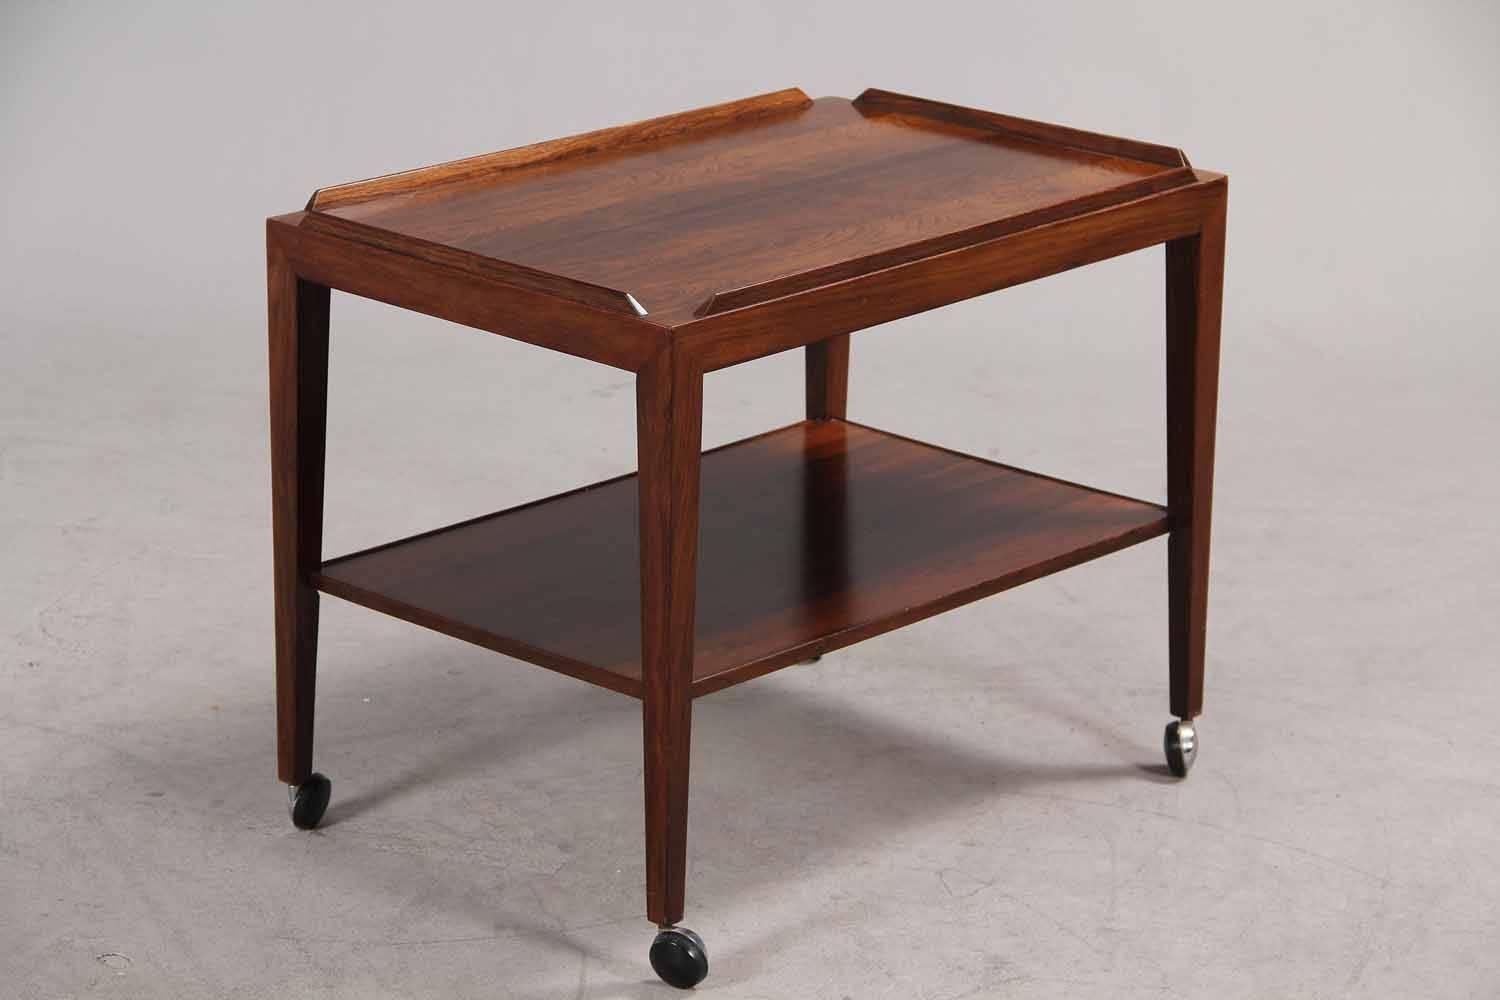 Haslev Møbelfabrik, a rolling side table made of rosewood with shelf and slightly tapered legs, completed on wheels. Made in Denmark in the 1960s.
Excellent original condition.